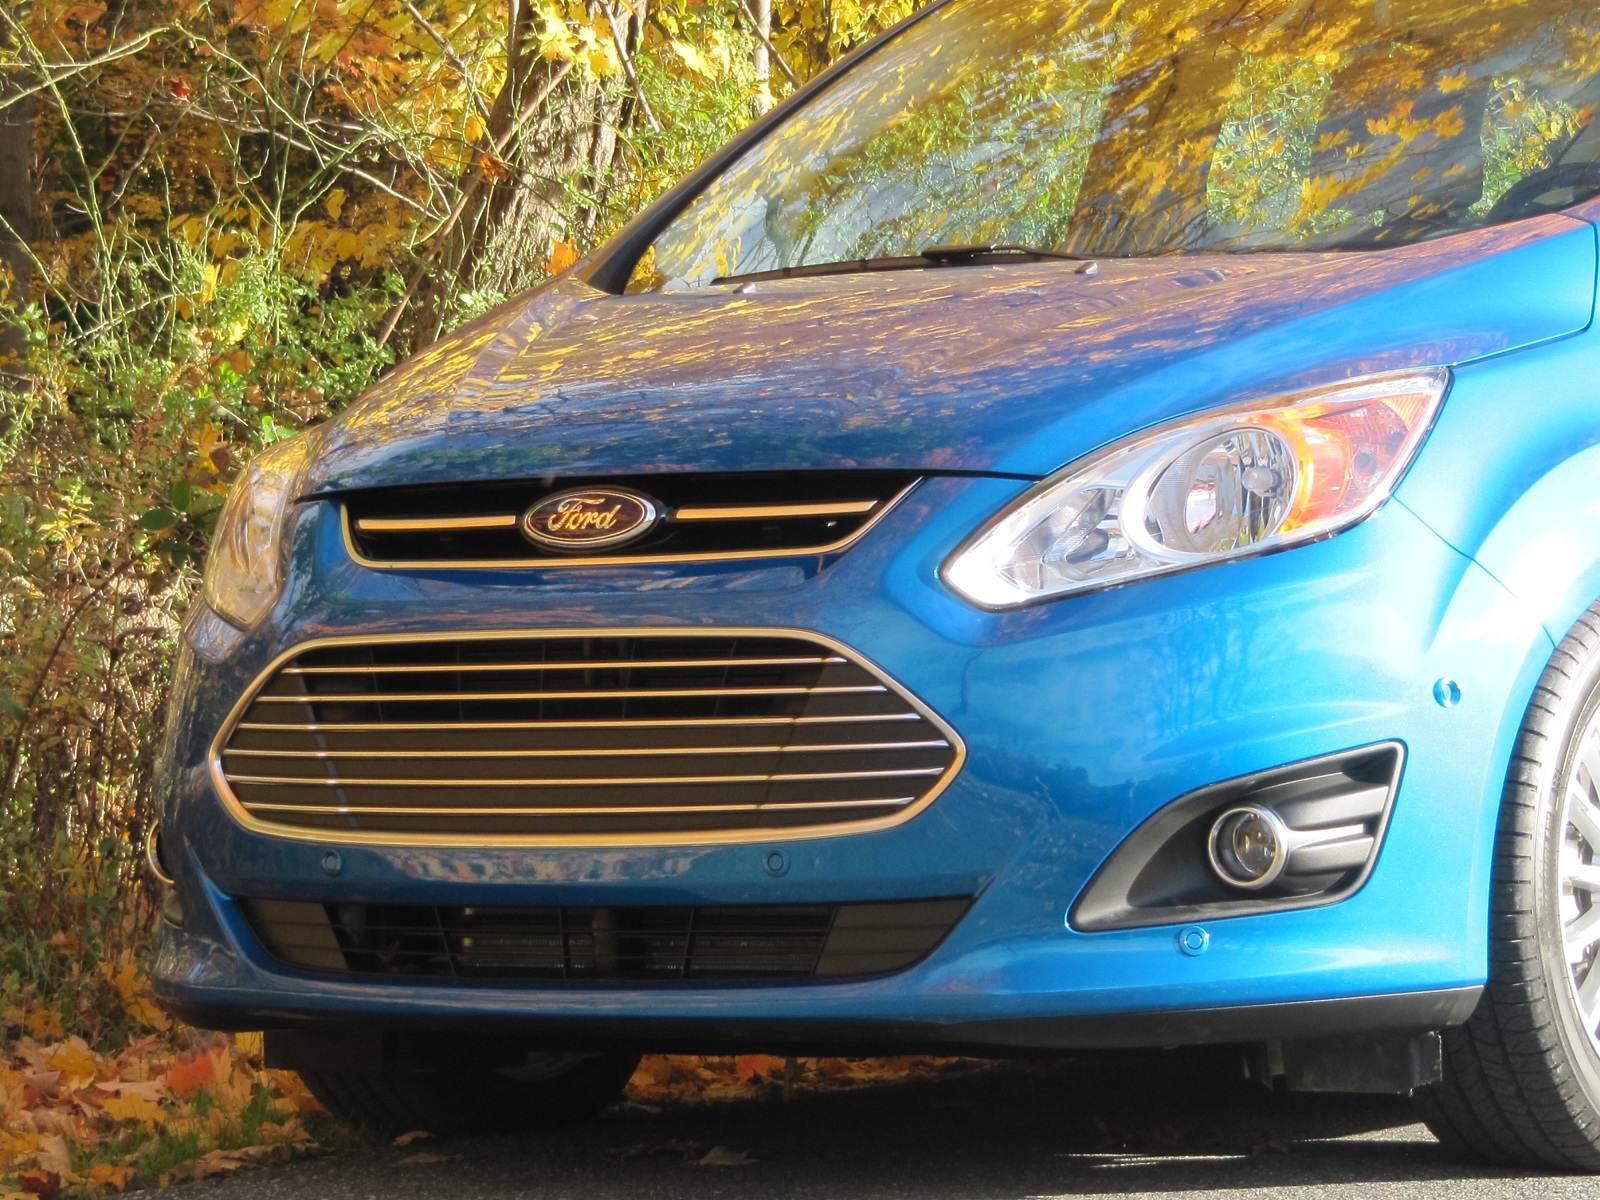 13 Ford C Max Hybrid Owners Get Cash As Ford Lowers Mpg Rating